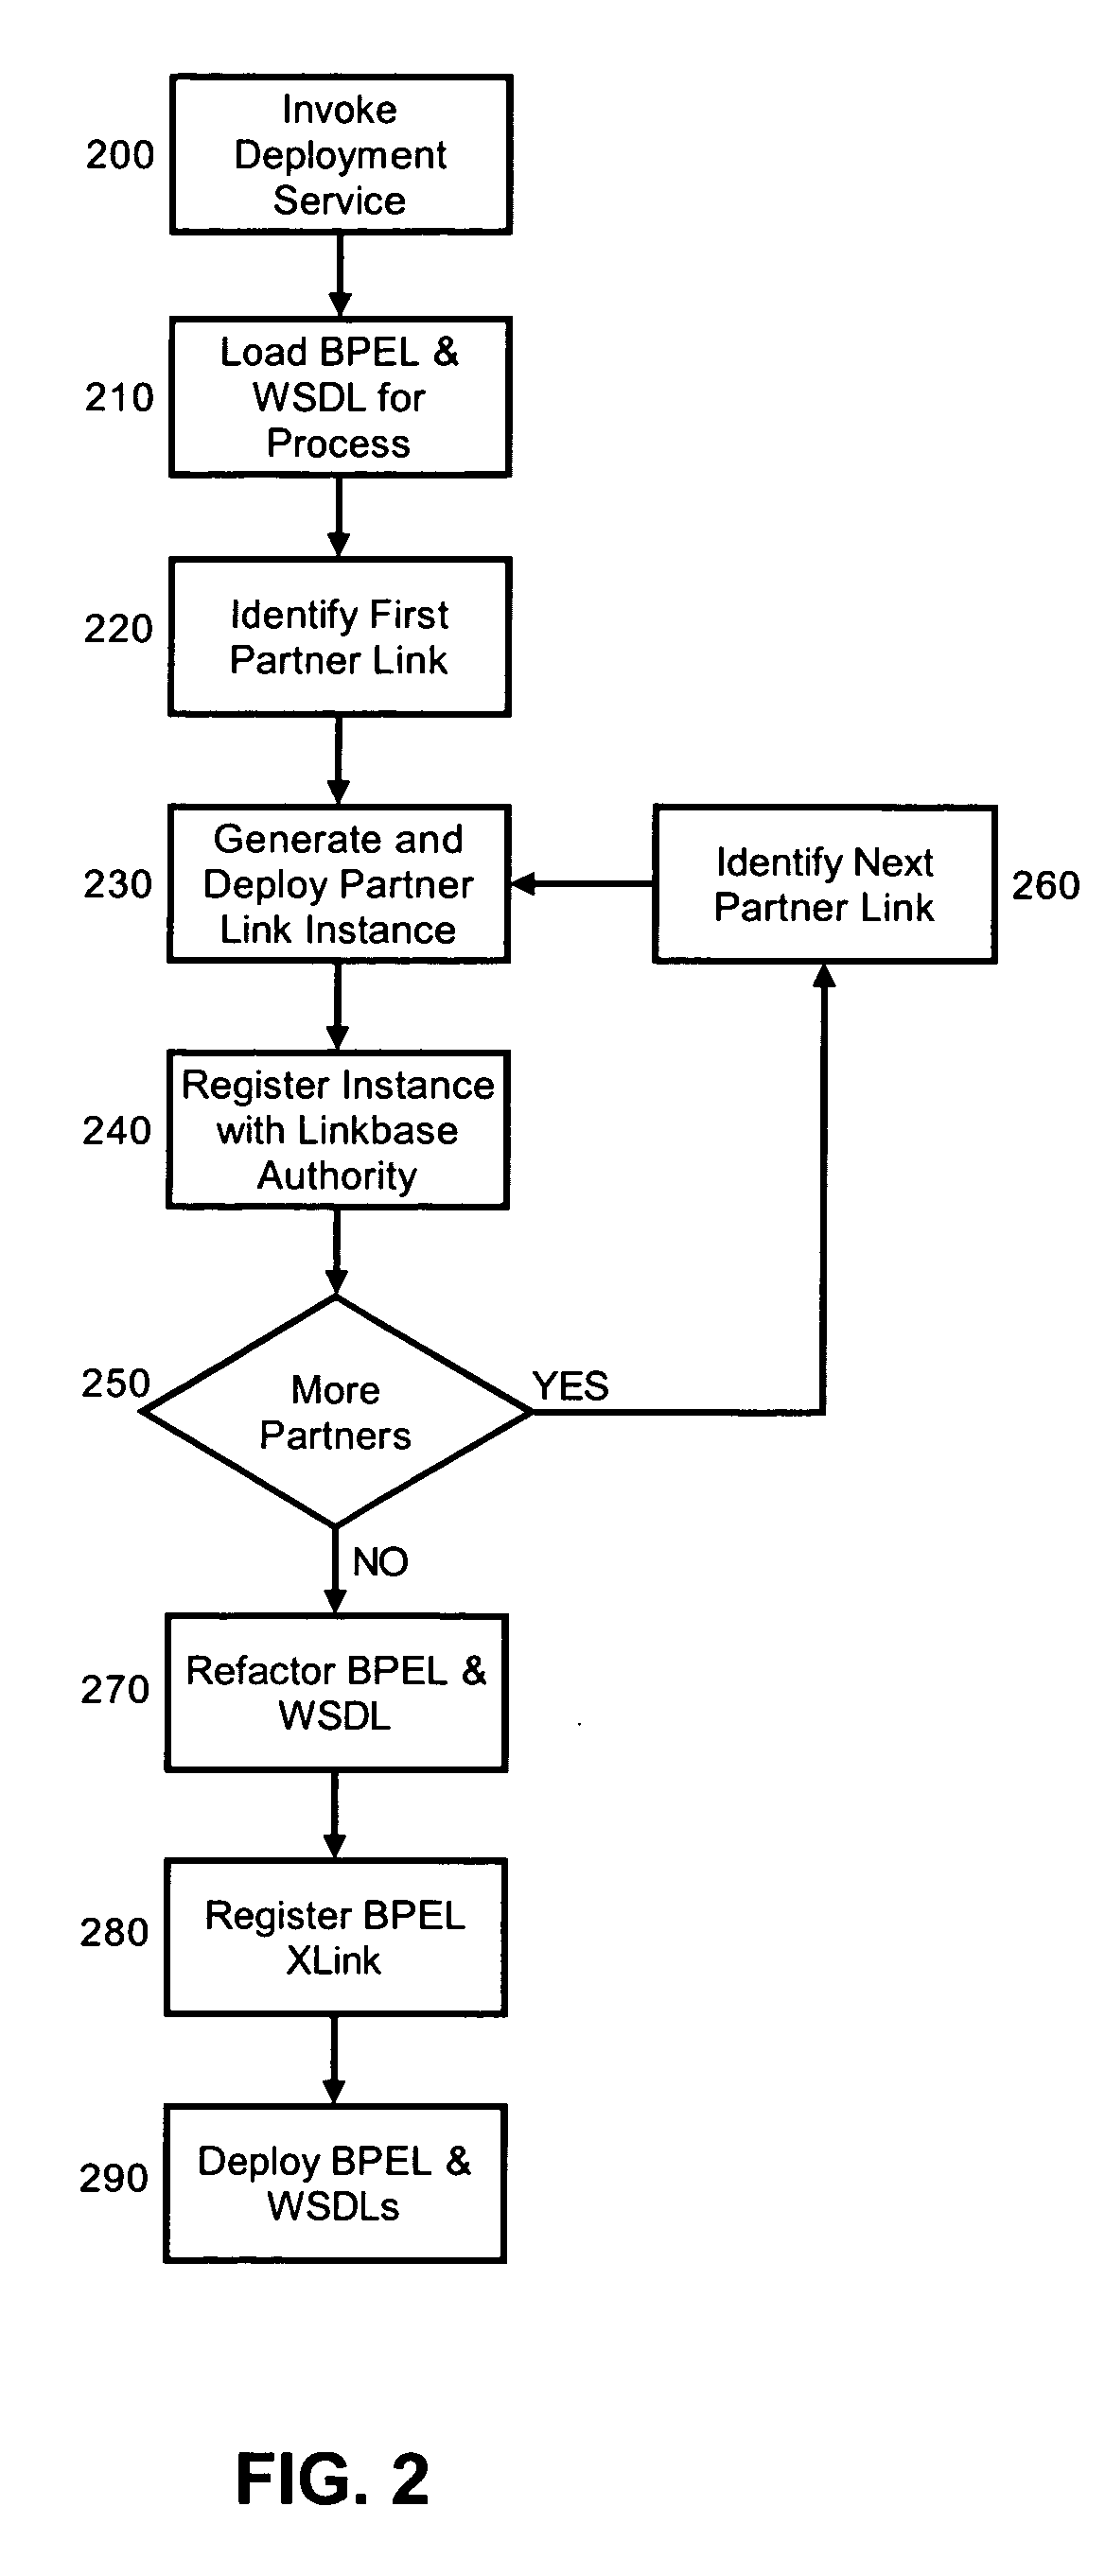 Dynamic binding of principal services in a cross-enterprise business process management system